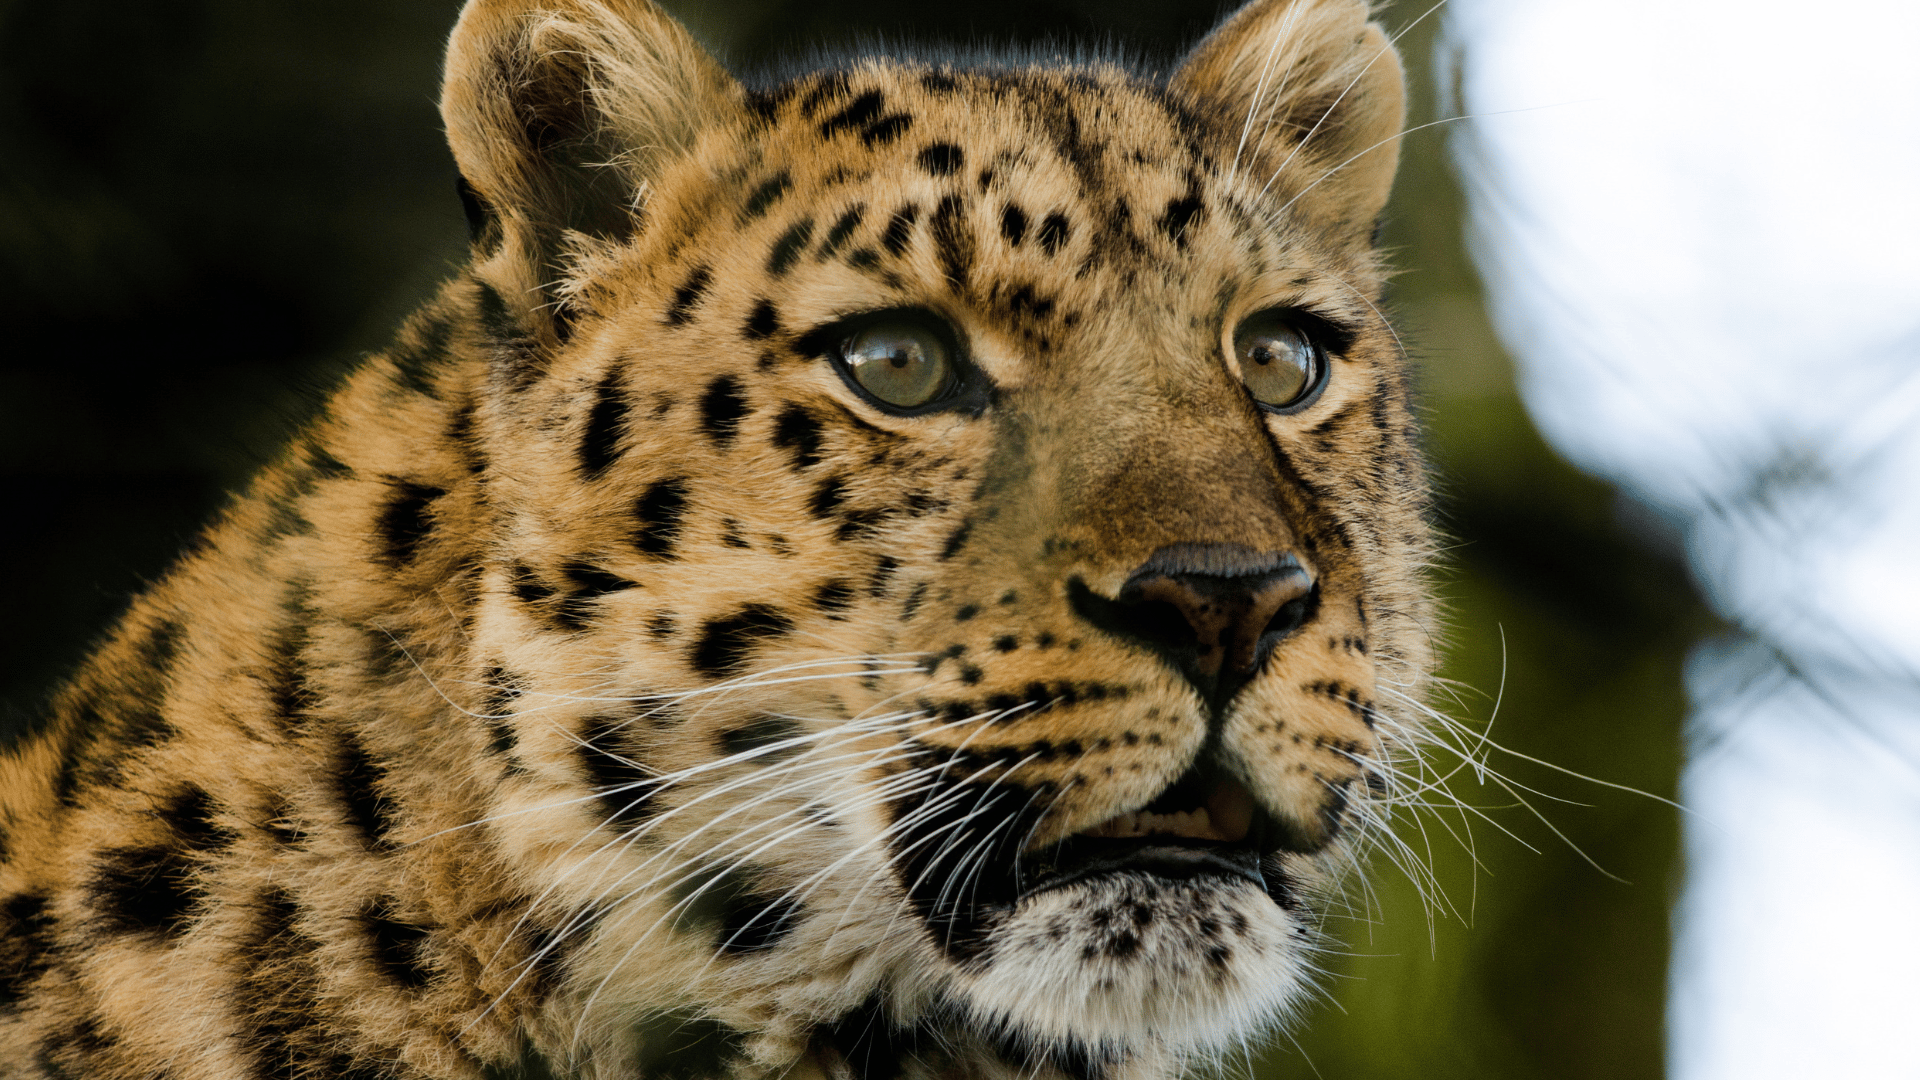 We need your help protecting Amur Leopards